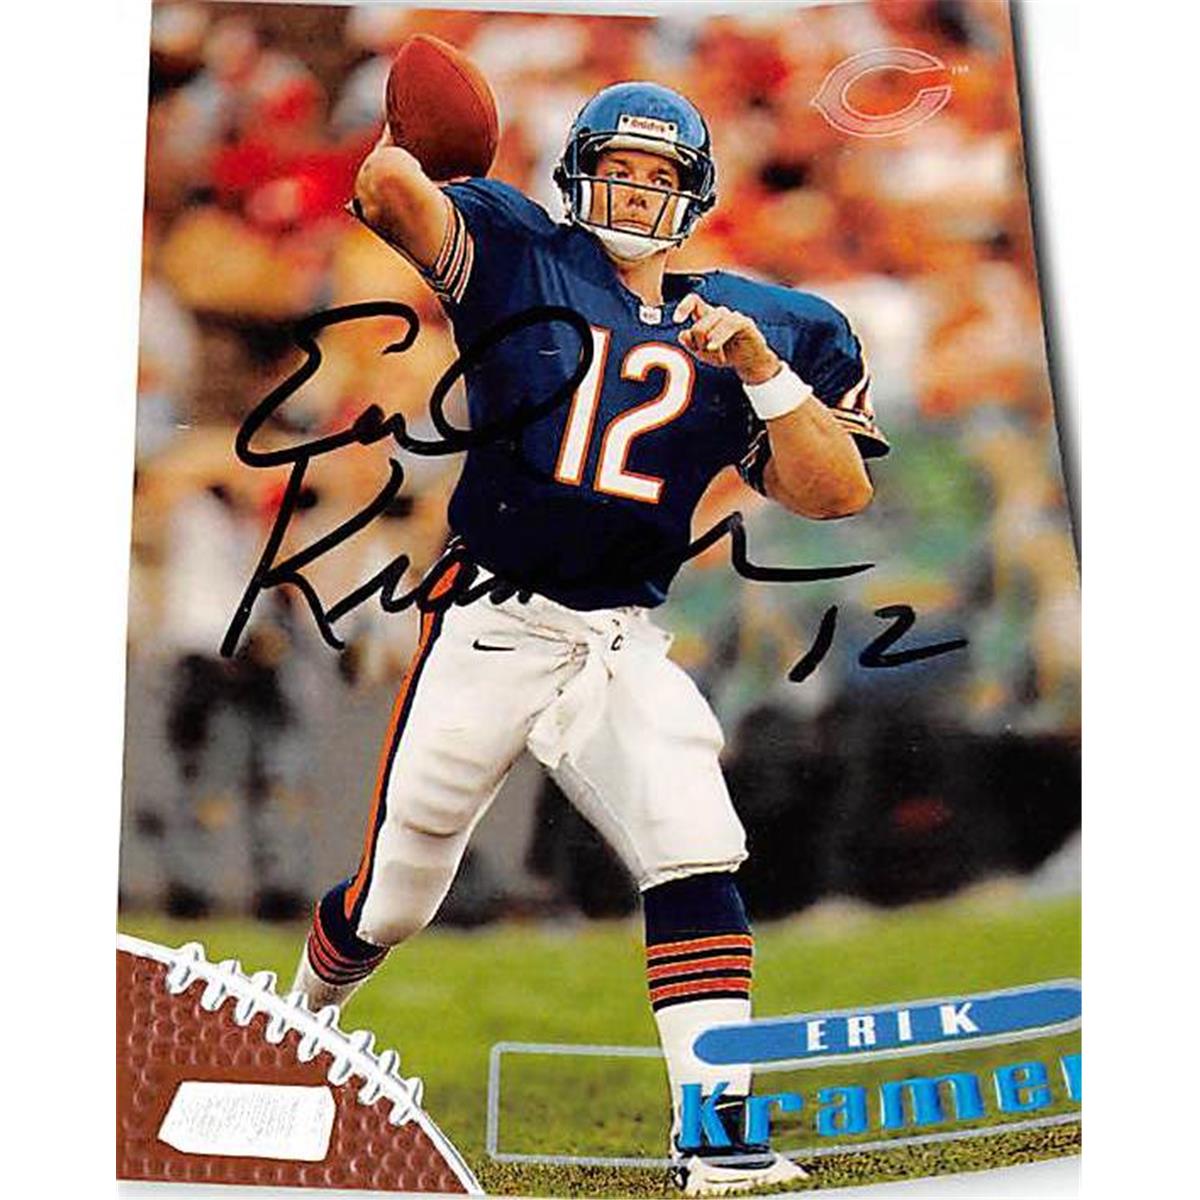 Picture of Autograph Warehouse 443940 Chicago Bears 1998 Topps Stadium Club 144 Erik Kramer Autographed Football Card